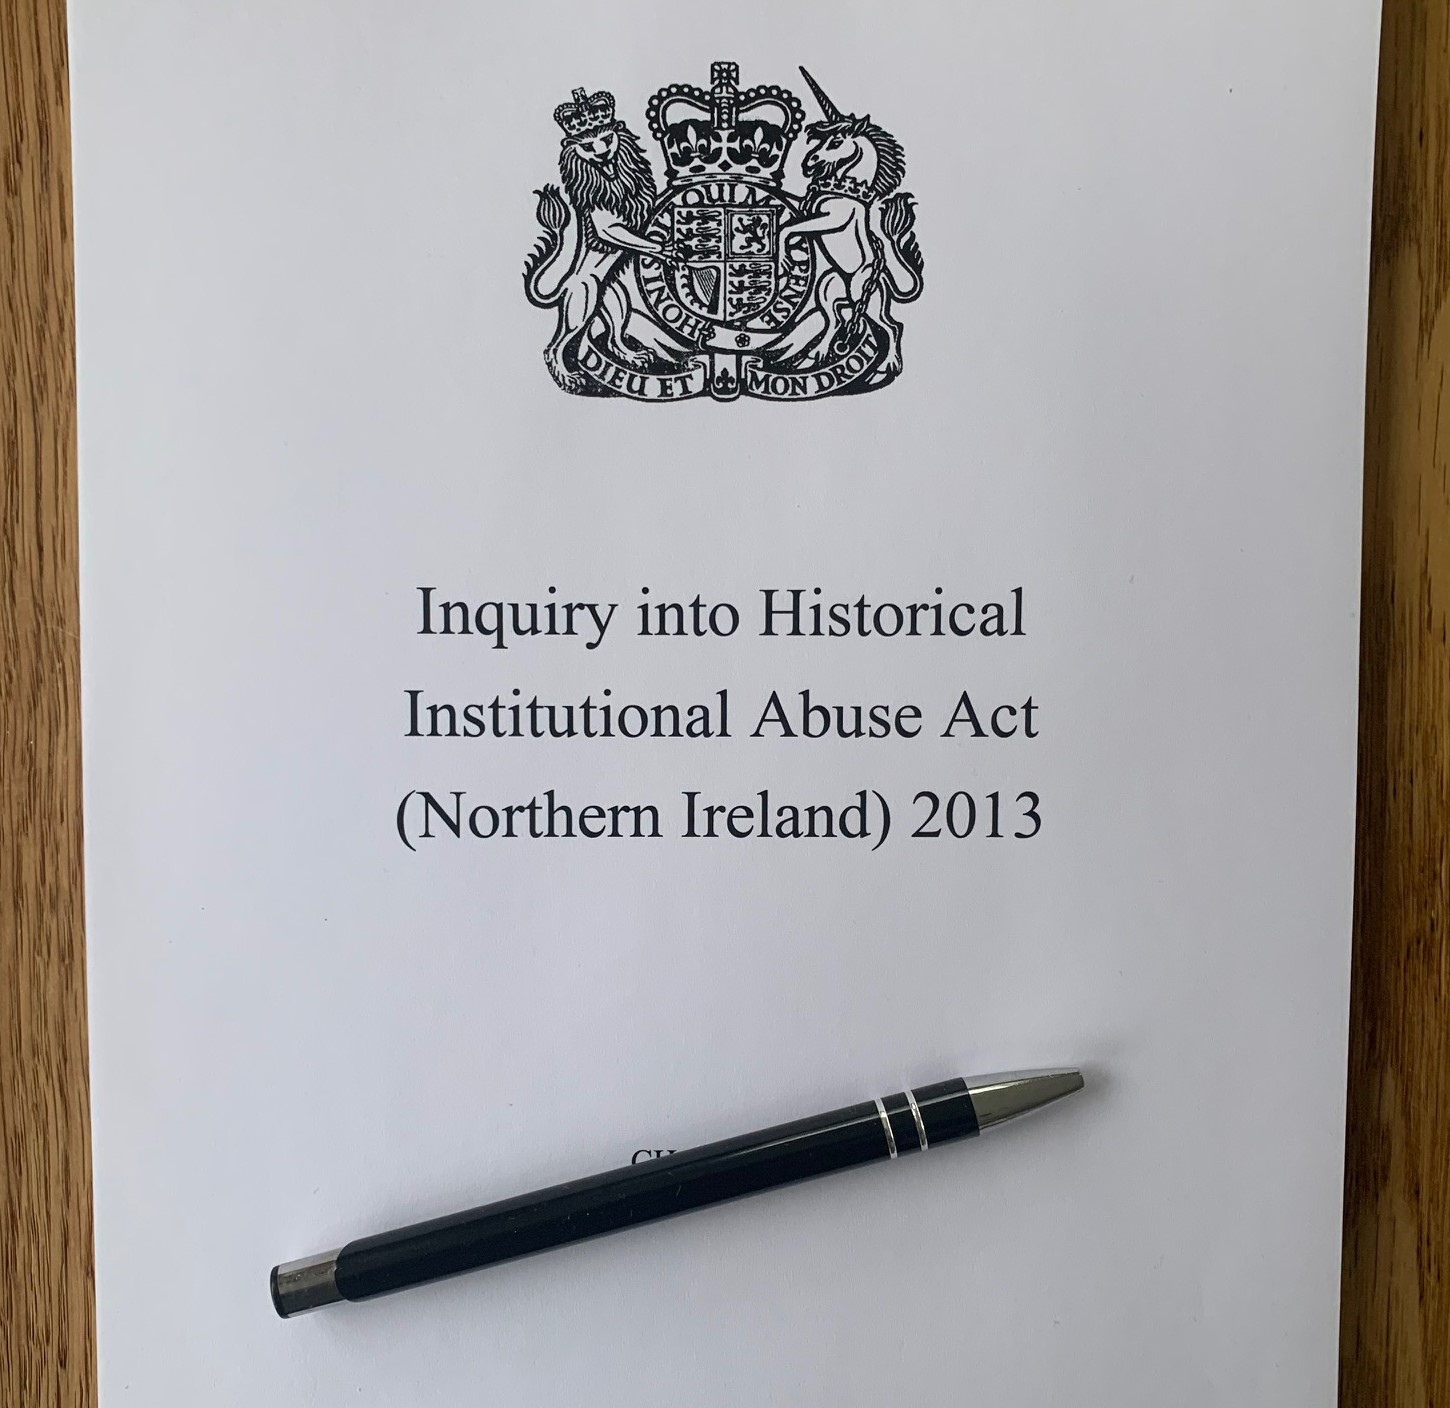 Are effective apologies for historical institutional abuse possible?